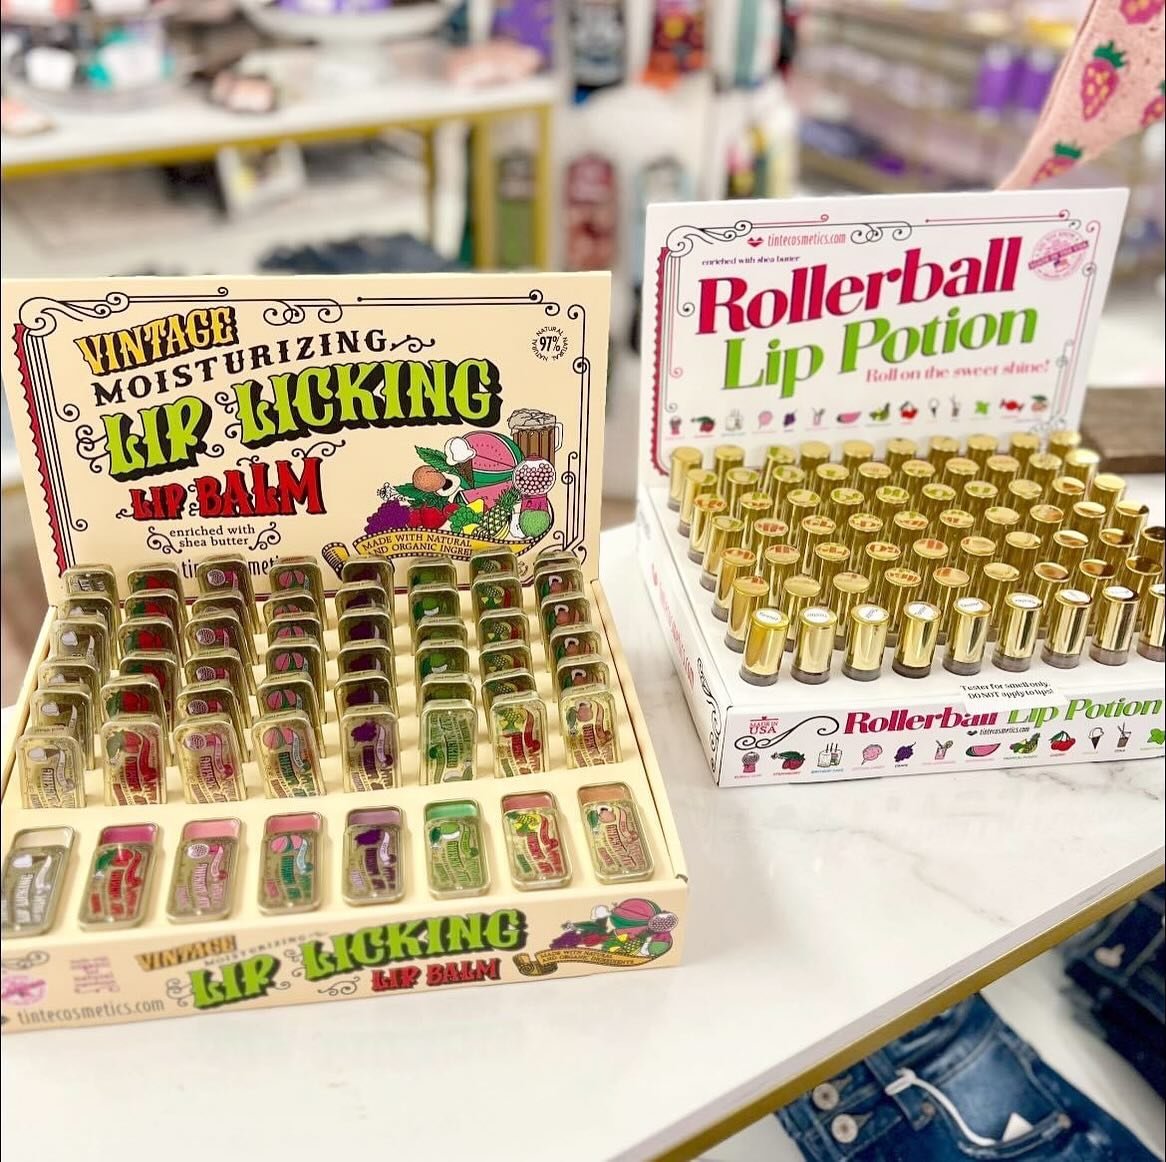 It has been so fun hearing customers react to seeing these in our Sylva store and bringing back so many childhood memories of having these when they were younger! The reactions have been priceless! Also priceless is seeing the younger generation buyi